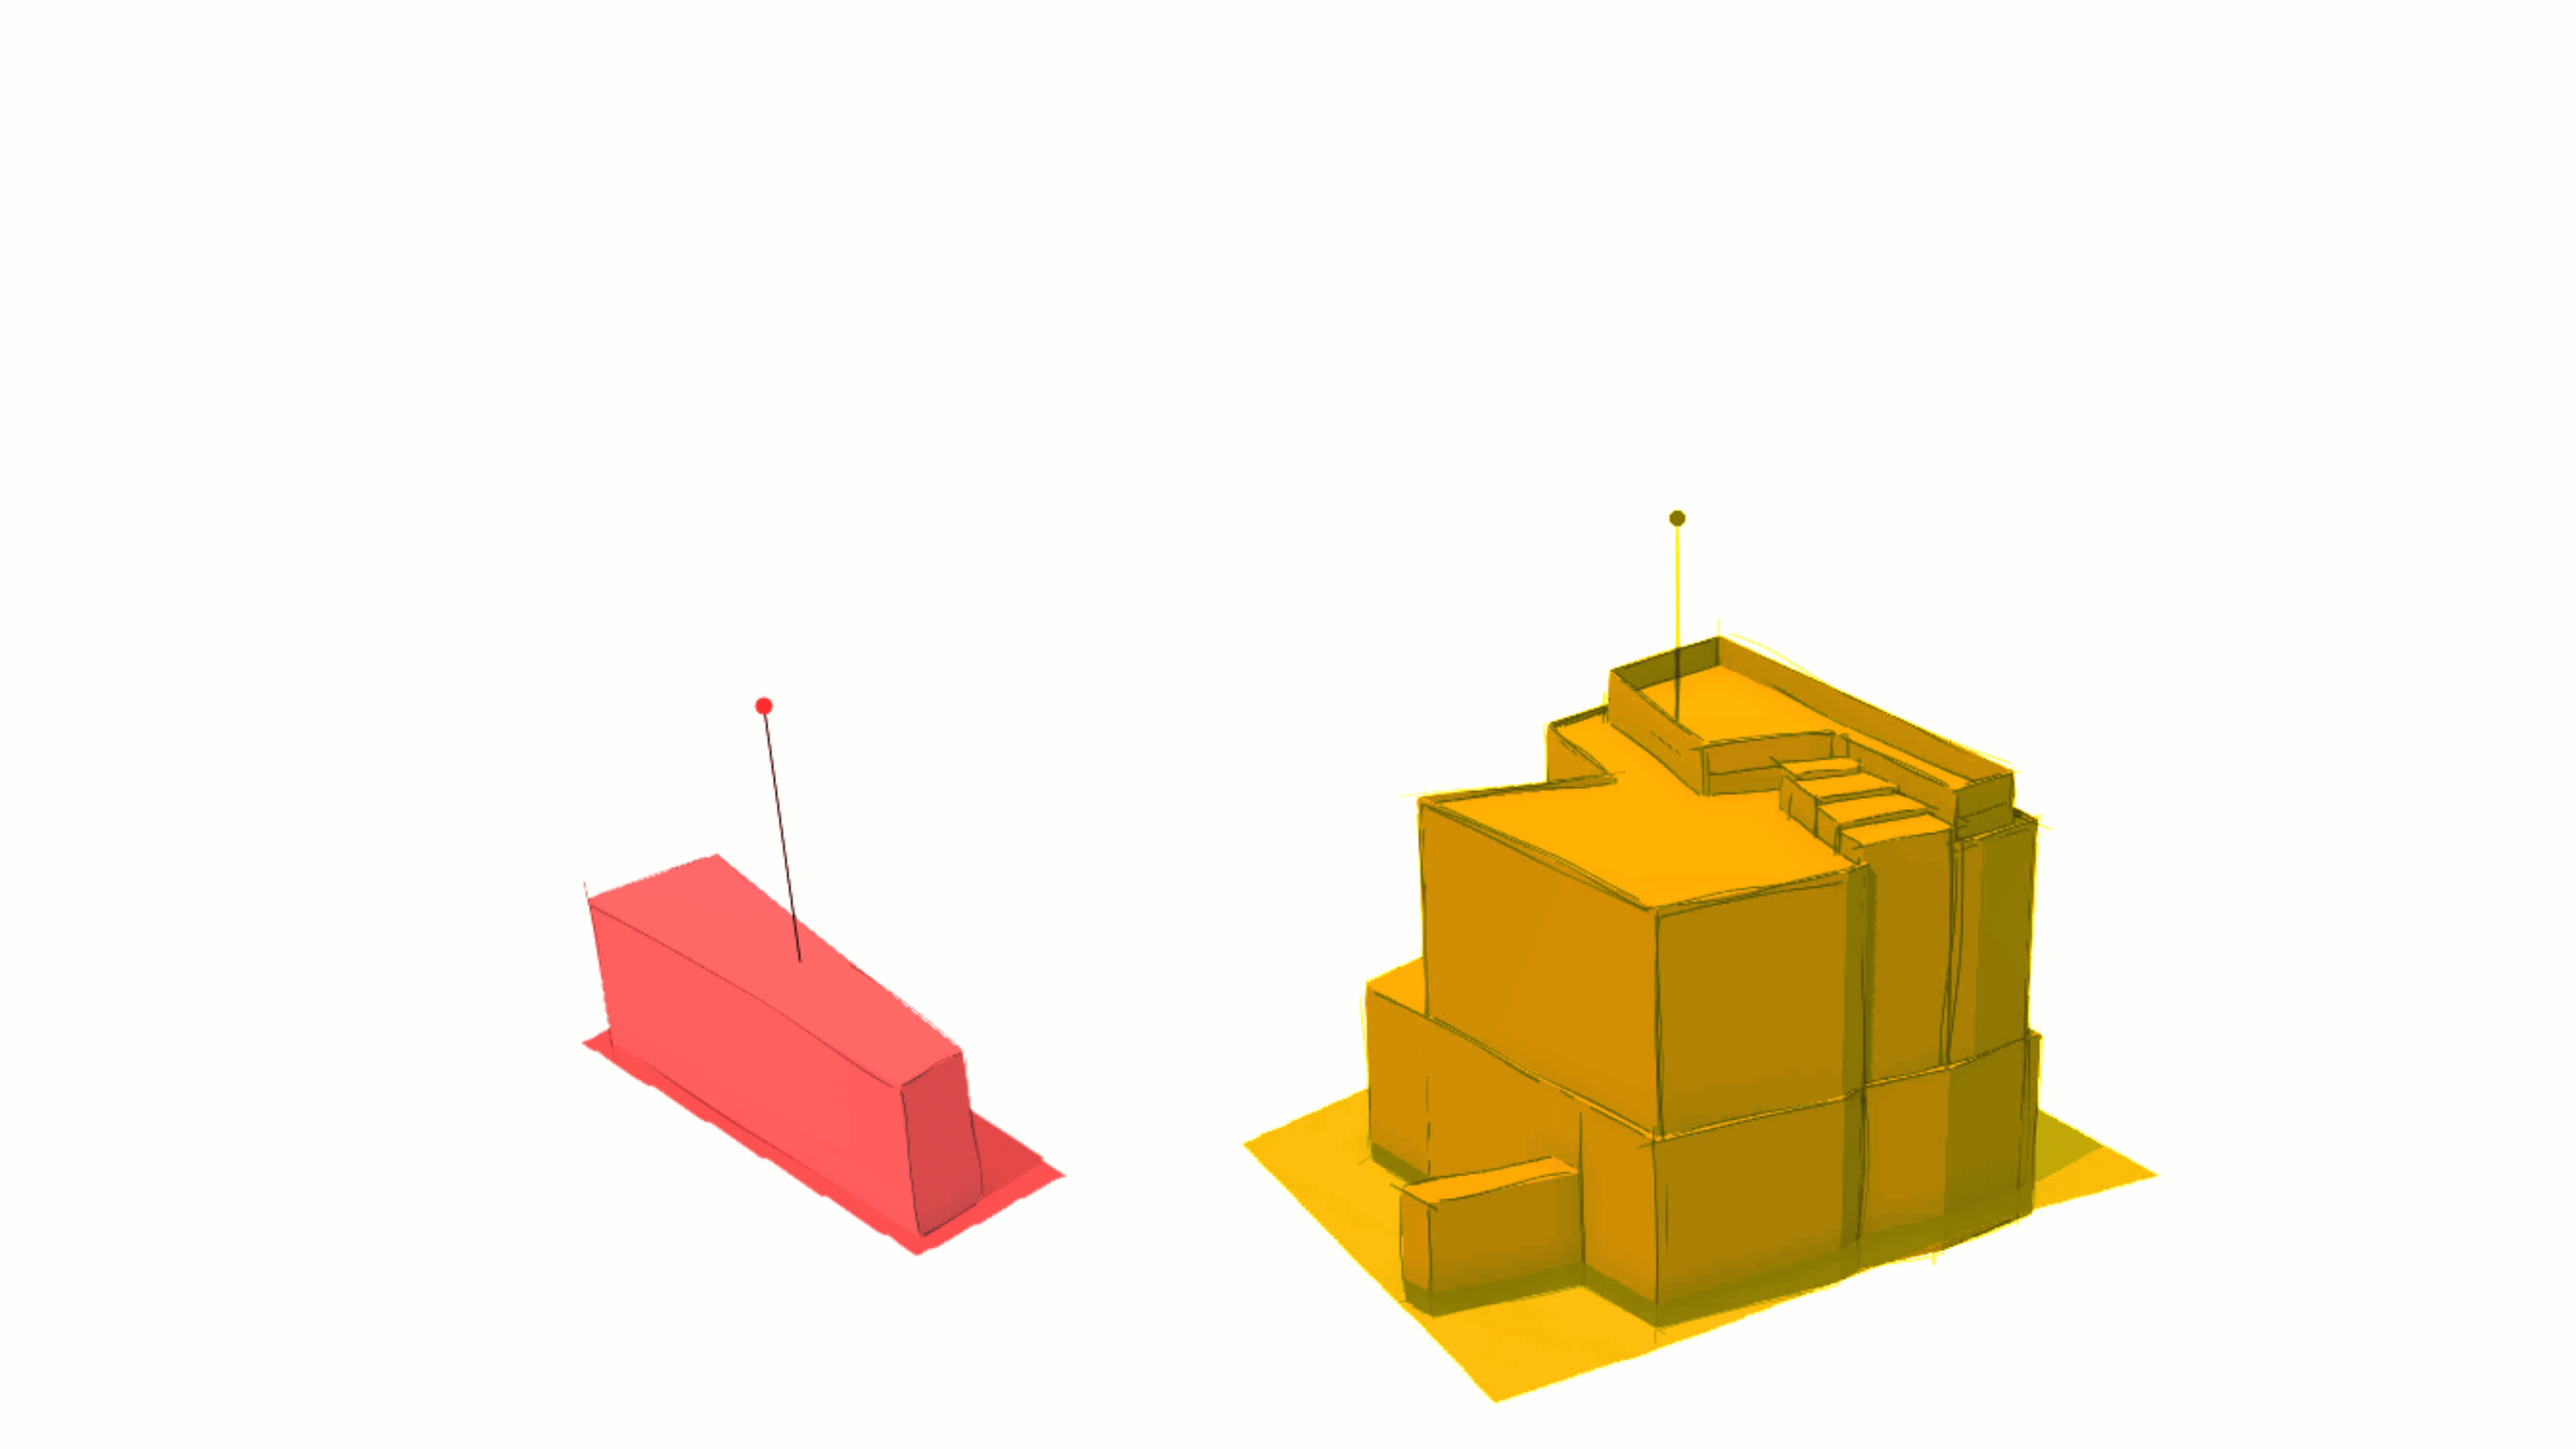 A GIF showing one pale orange and one redc3D building highlighted for development